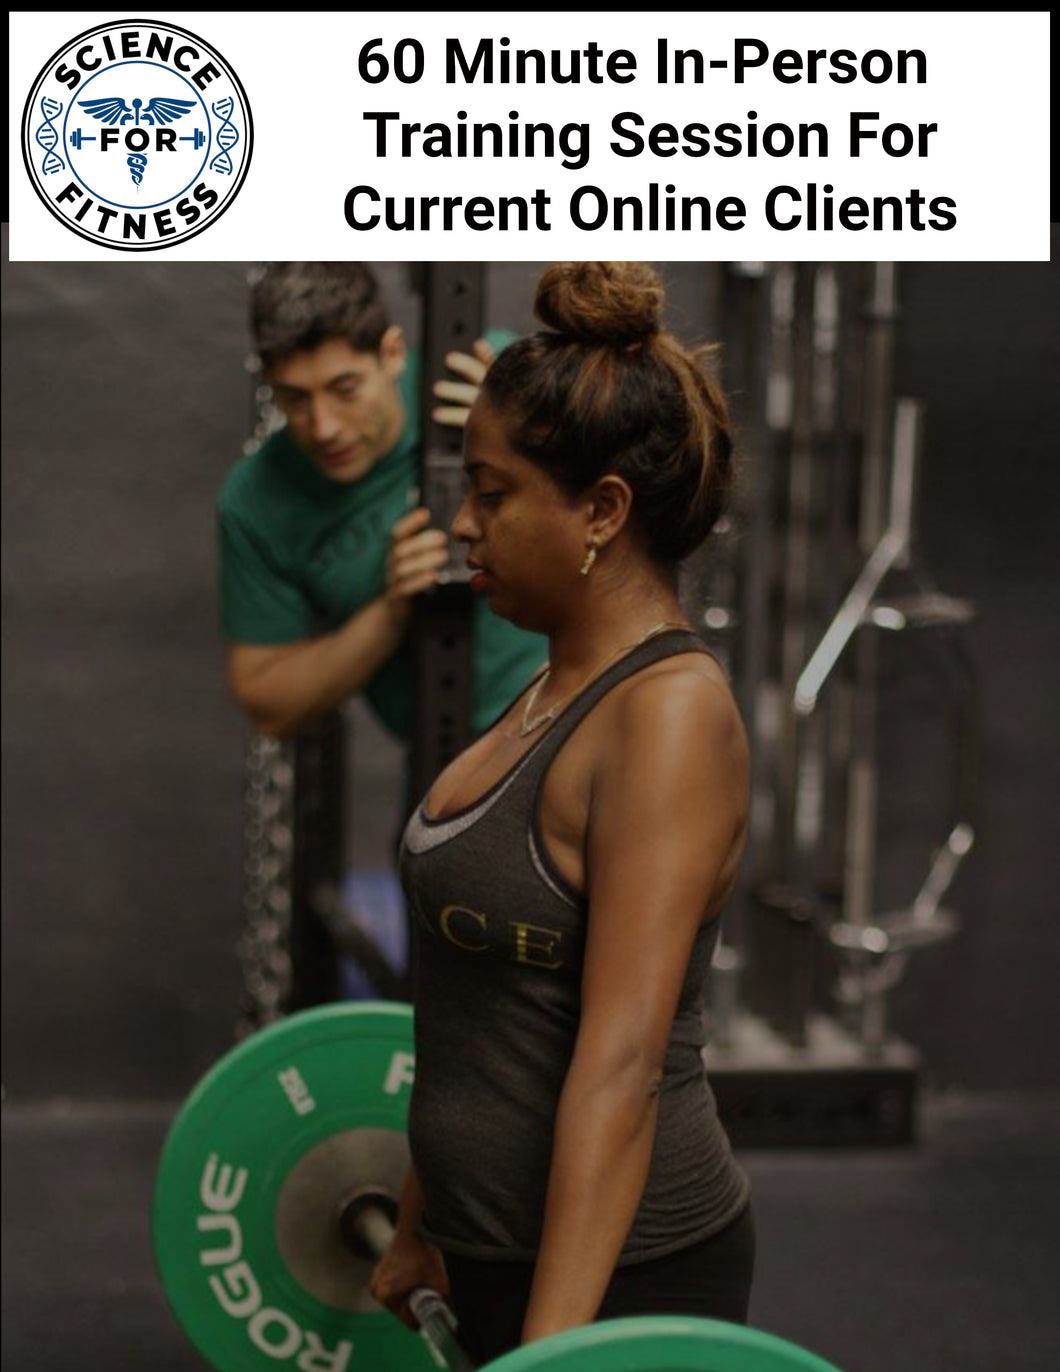 60 Min In-Person Training Session For Current Online Clients